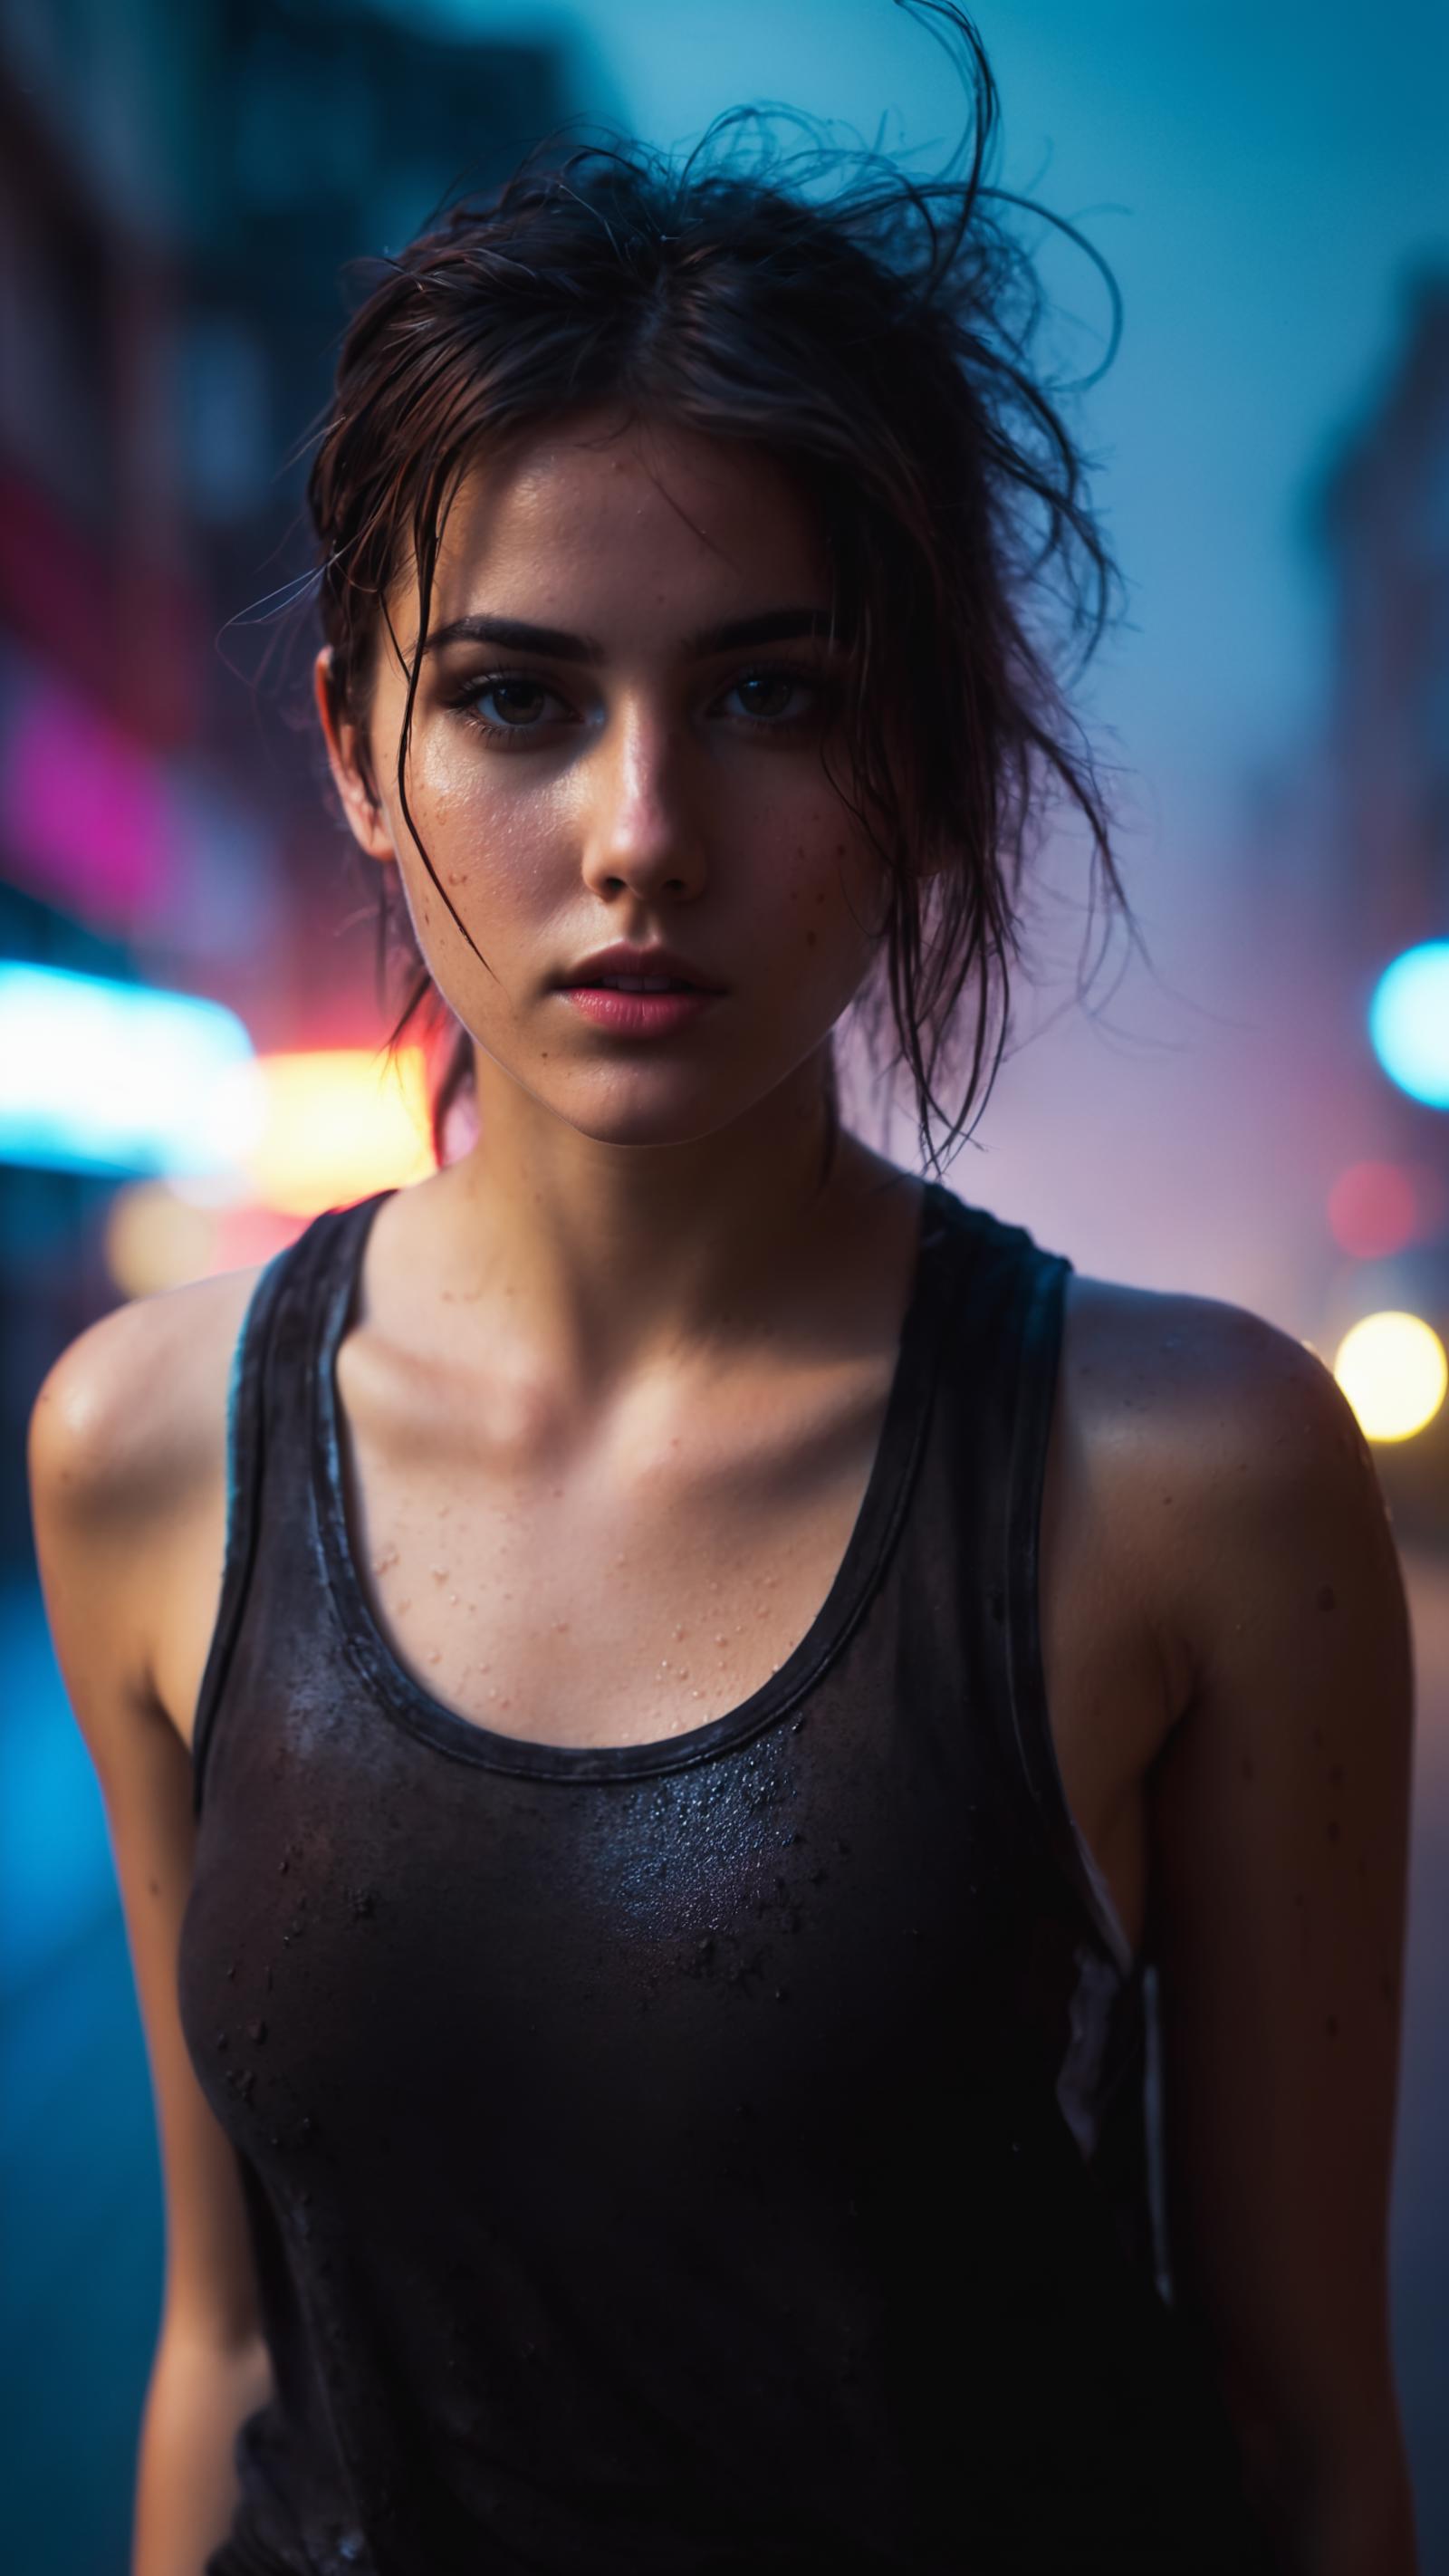 A young woman with wet hair and a tank top, looking towards the camera.